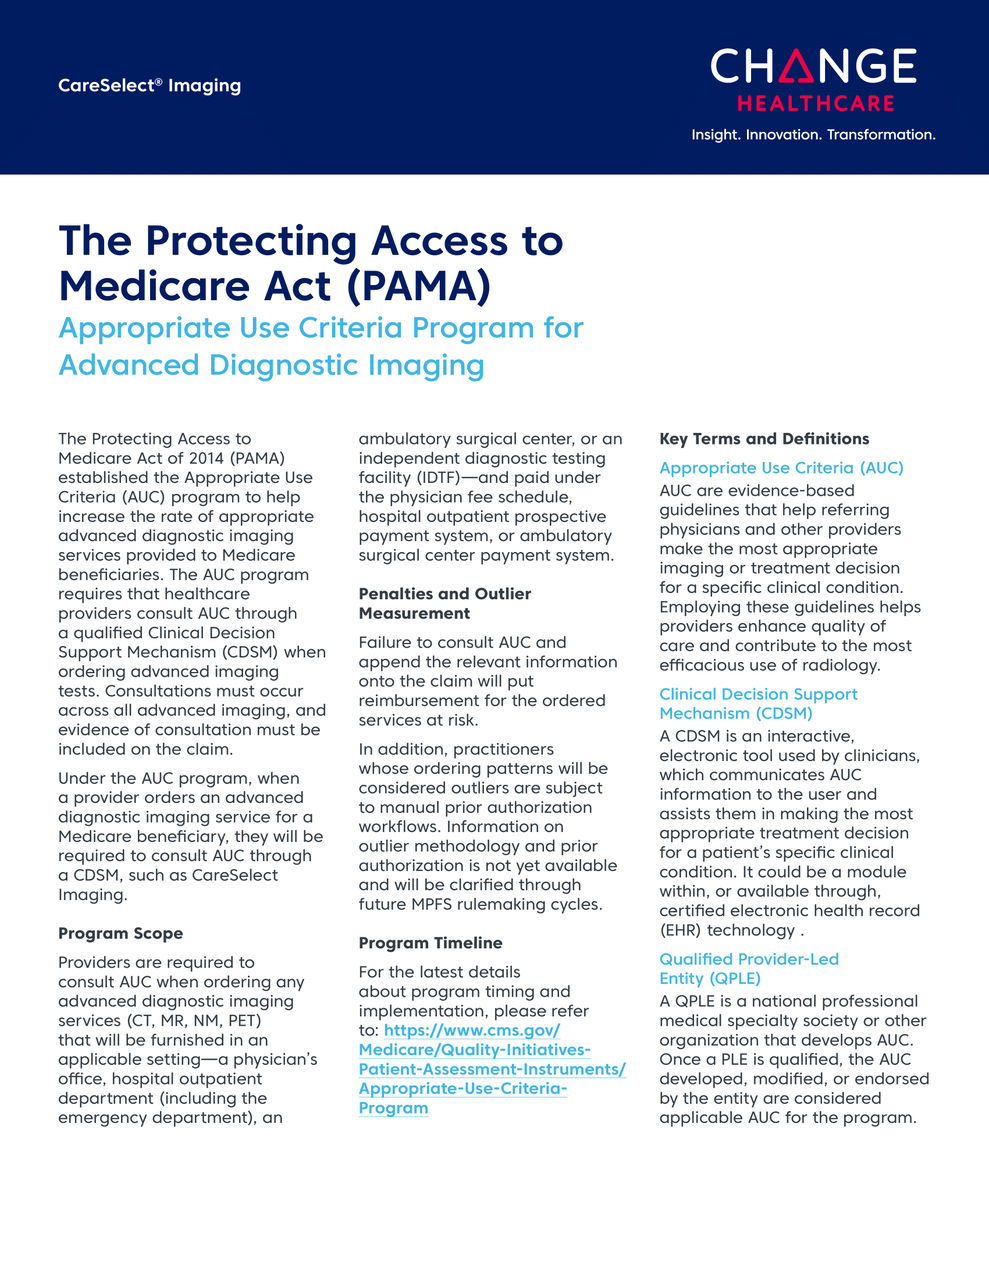 The protecting access to medicare act